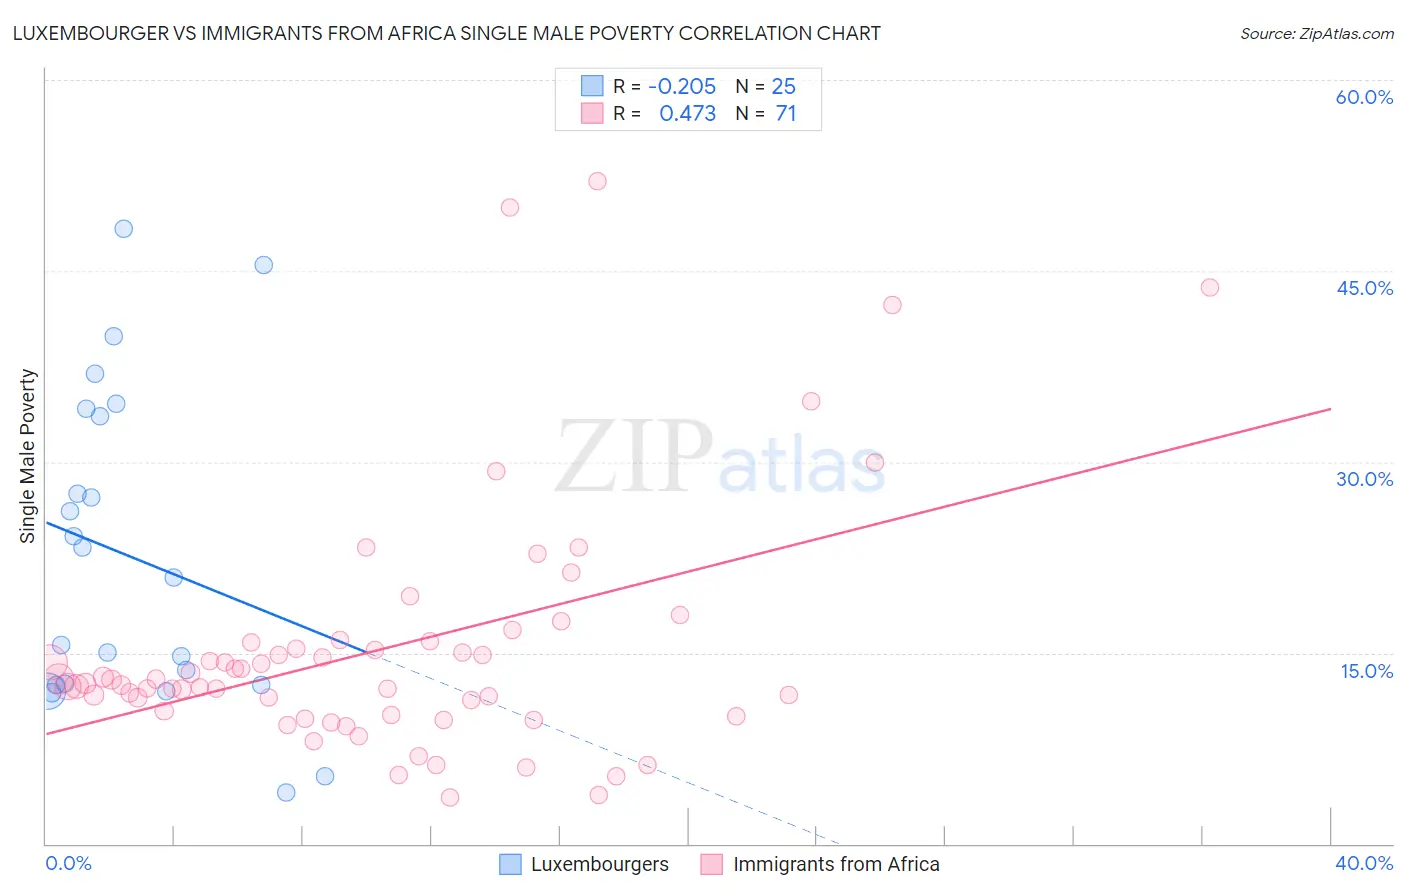 Luxembourger vs Immigrants from Africa Single Male Poverty